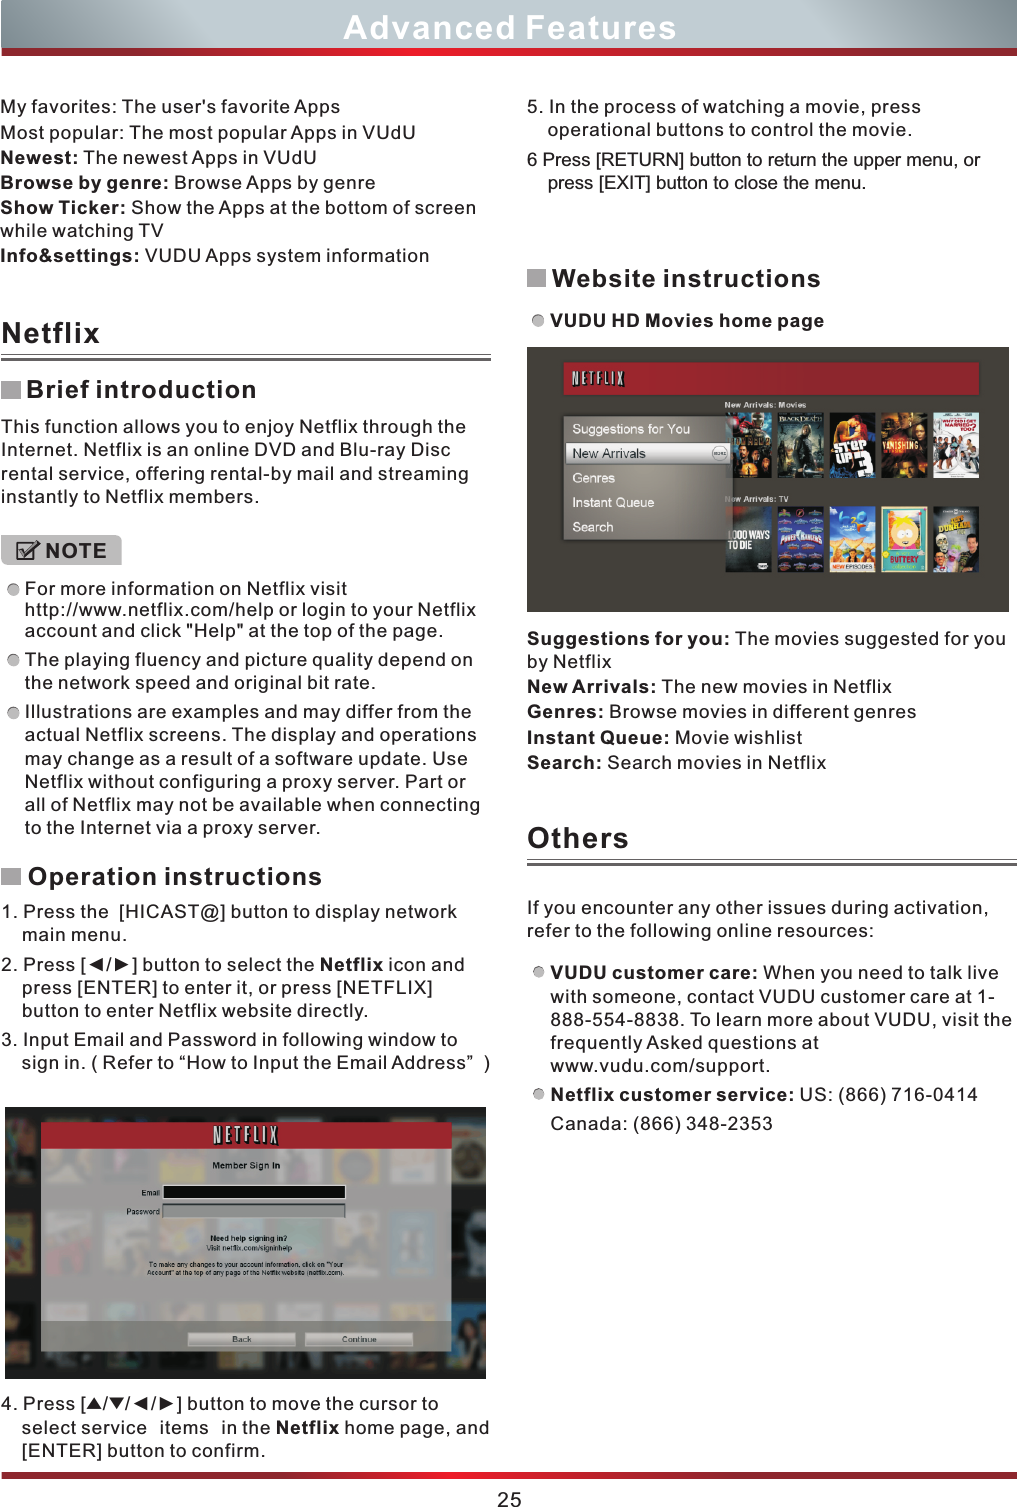 Advanced FeaturesBrief introductionOperation instructions1. Press the  [HICAST@] button to display network main menu.2. Press [◄/►] button to select the Netflix icon and press [ENTER] to enter it, or press [NETFLIX] button to enter Netflix website directly.    efer to “How to Input the Email Address”  Press [▲/▼/◄/►] button to move the cursor to select service items in the Netflix home page, and [ENTER] button to confirm.3. Input Email and Password in following window to sign in. ( R )4. My favorites: The user&apos;s favorite AppsMost popular: The most popular Apps in VUdUNewest: The newest Apps in VUdUBrowse by genre: Browse Apps by genre Show Ticker: Show the Apps at the bottom of screen while watching TVInfo&amp;settings: VUDU Apps system informationNetflixOthersThis function allows you to enjoy Netflix through the Internet. Netflix is an online DVD and Blu-ray Disc rental service, offering rental-by mail and streaming instantly to Netflix members.For more information on Netflix visit http://www.netflix.com/help or login to your Netflix account and click &quot;Help&quot; at the top of the page.The playing fluency and picture quality depend on the network speed and original bit rate.Illustrations are examples and may differ from the actual Netflix screens. The display and operations may change as a result of a software update. Use Netflix without configuring a proxy server. Part or all of Netflix may not be available when connecting to the Internet via a proxy server.NOTE5. In the process of watching a movie, press operational buttons to control the movie. 6 Press [RETURN] button to return the upper menu, or press [EXIT] button to close the menu.VUDU customer care: When you need to talk live with someone, contact VUDU customer care at 1- 888-554-8838. To learn more about VUDU, visit the frequently Asked questions at www.vudu.com/support.Netflix customer service: US: (866) 716-0414 Canada: (866) 348-2353If you encounter any other issues during activation, refer to the following online resources:Suggestions for you: The movies suggested for you by NetflixNew Arrivals: The new movies in NetflixGenres: Browse movies in different genresInstant Queue: Movie wishlistSearch: Search movies in NetflixWebsite instructionsVUDU HD Movies home page25